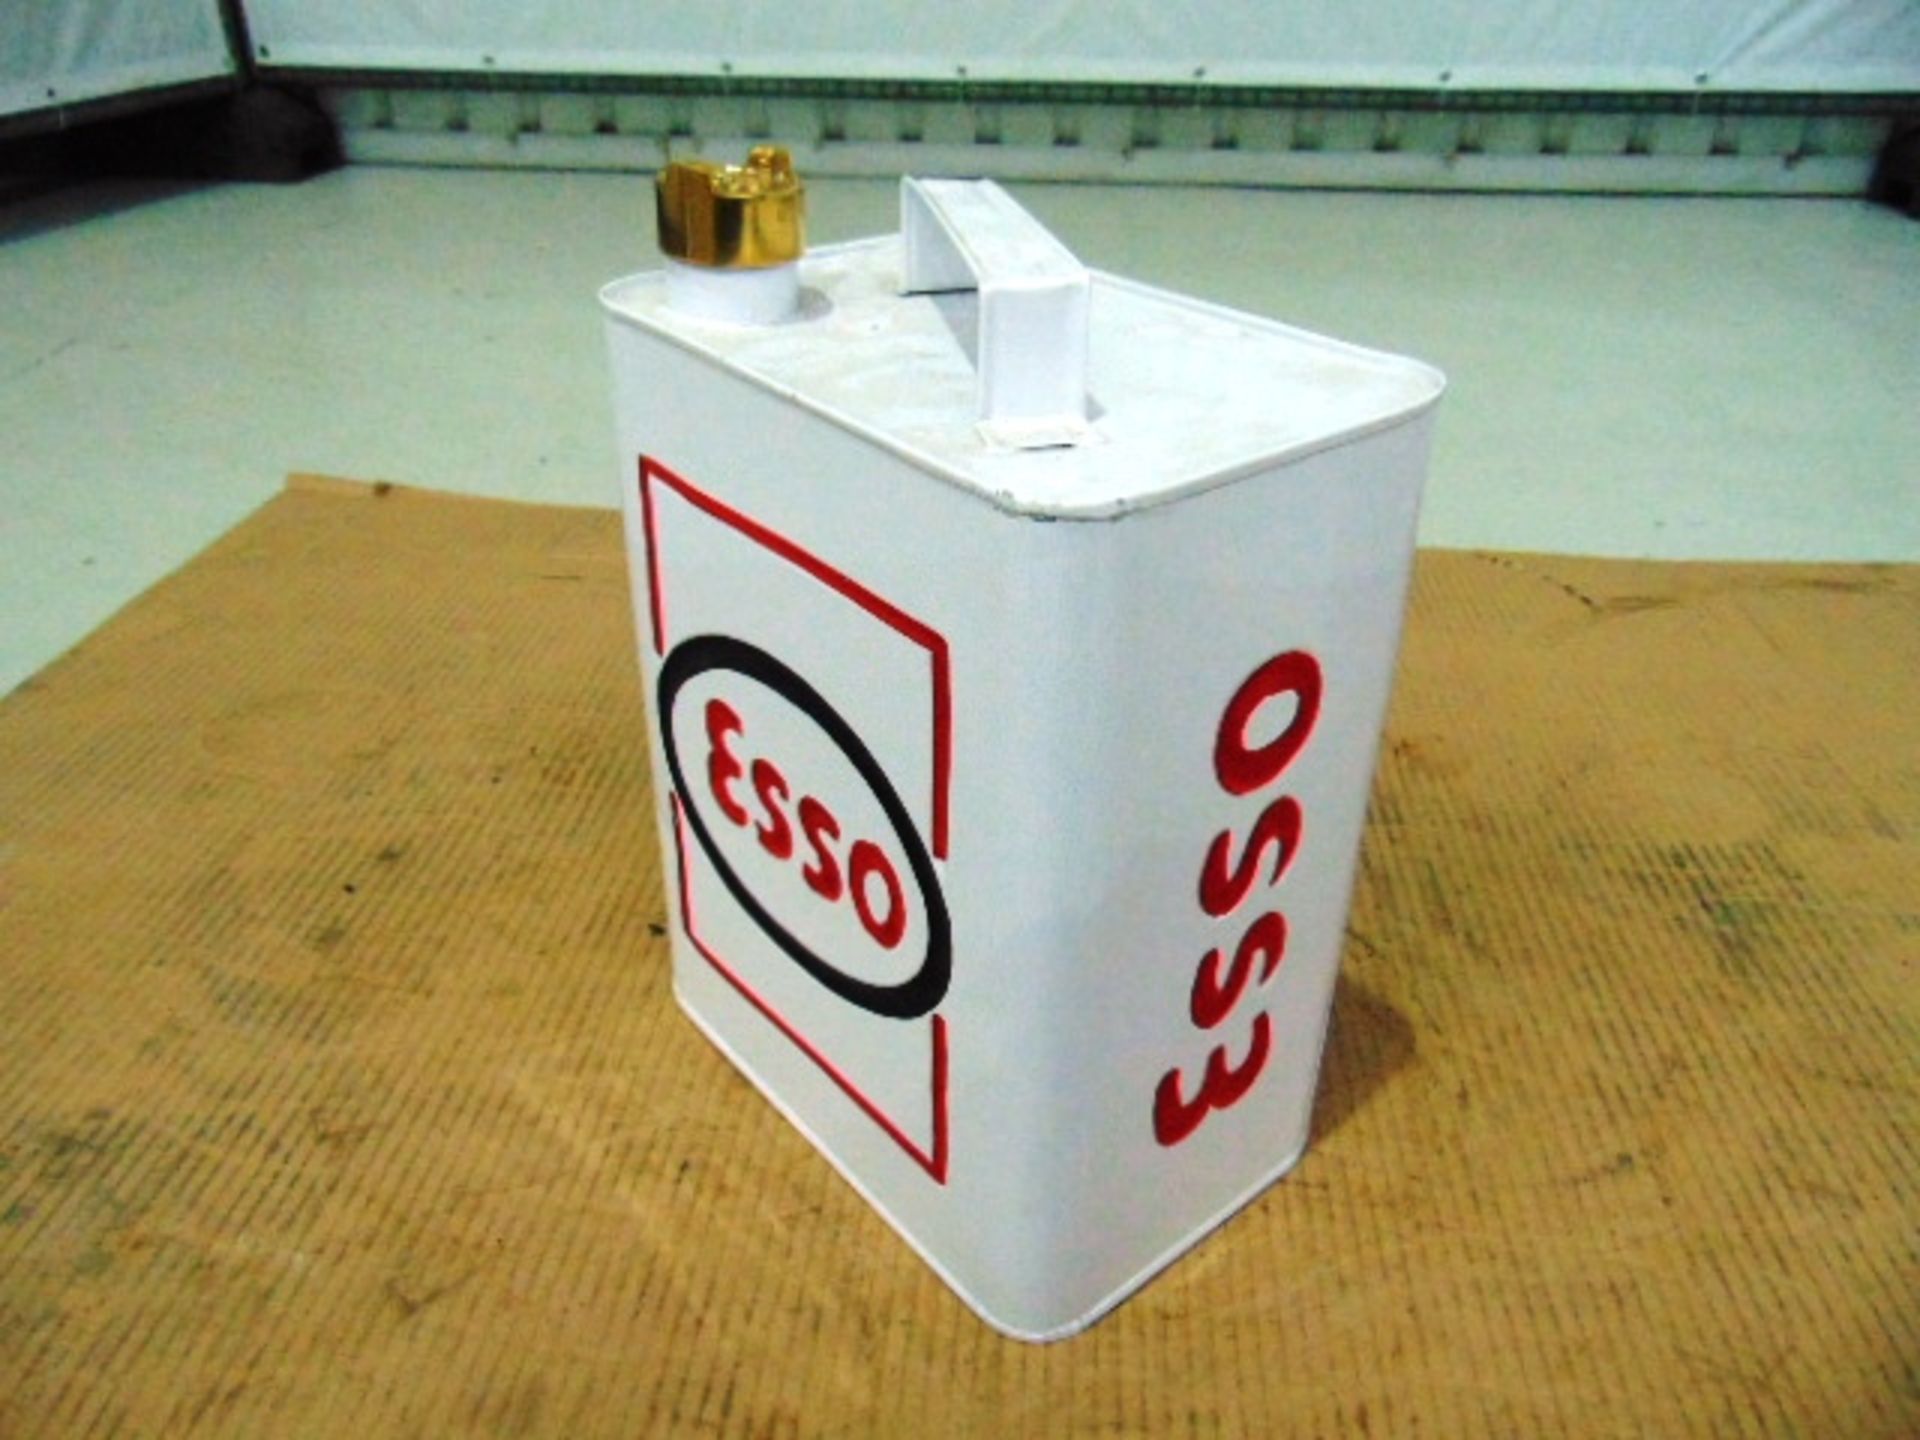 Esso Branded Oil Can - Image 3 of 6